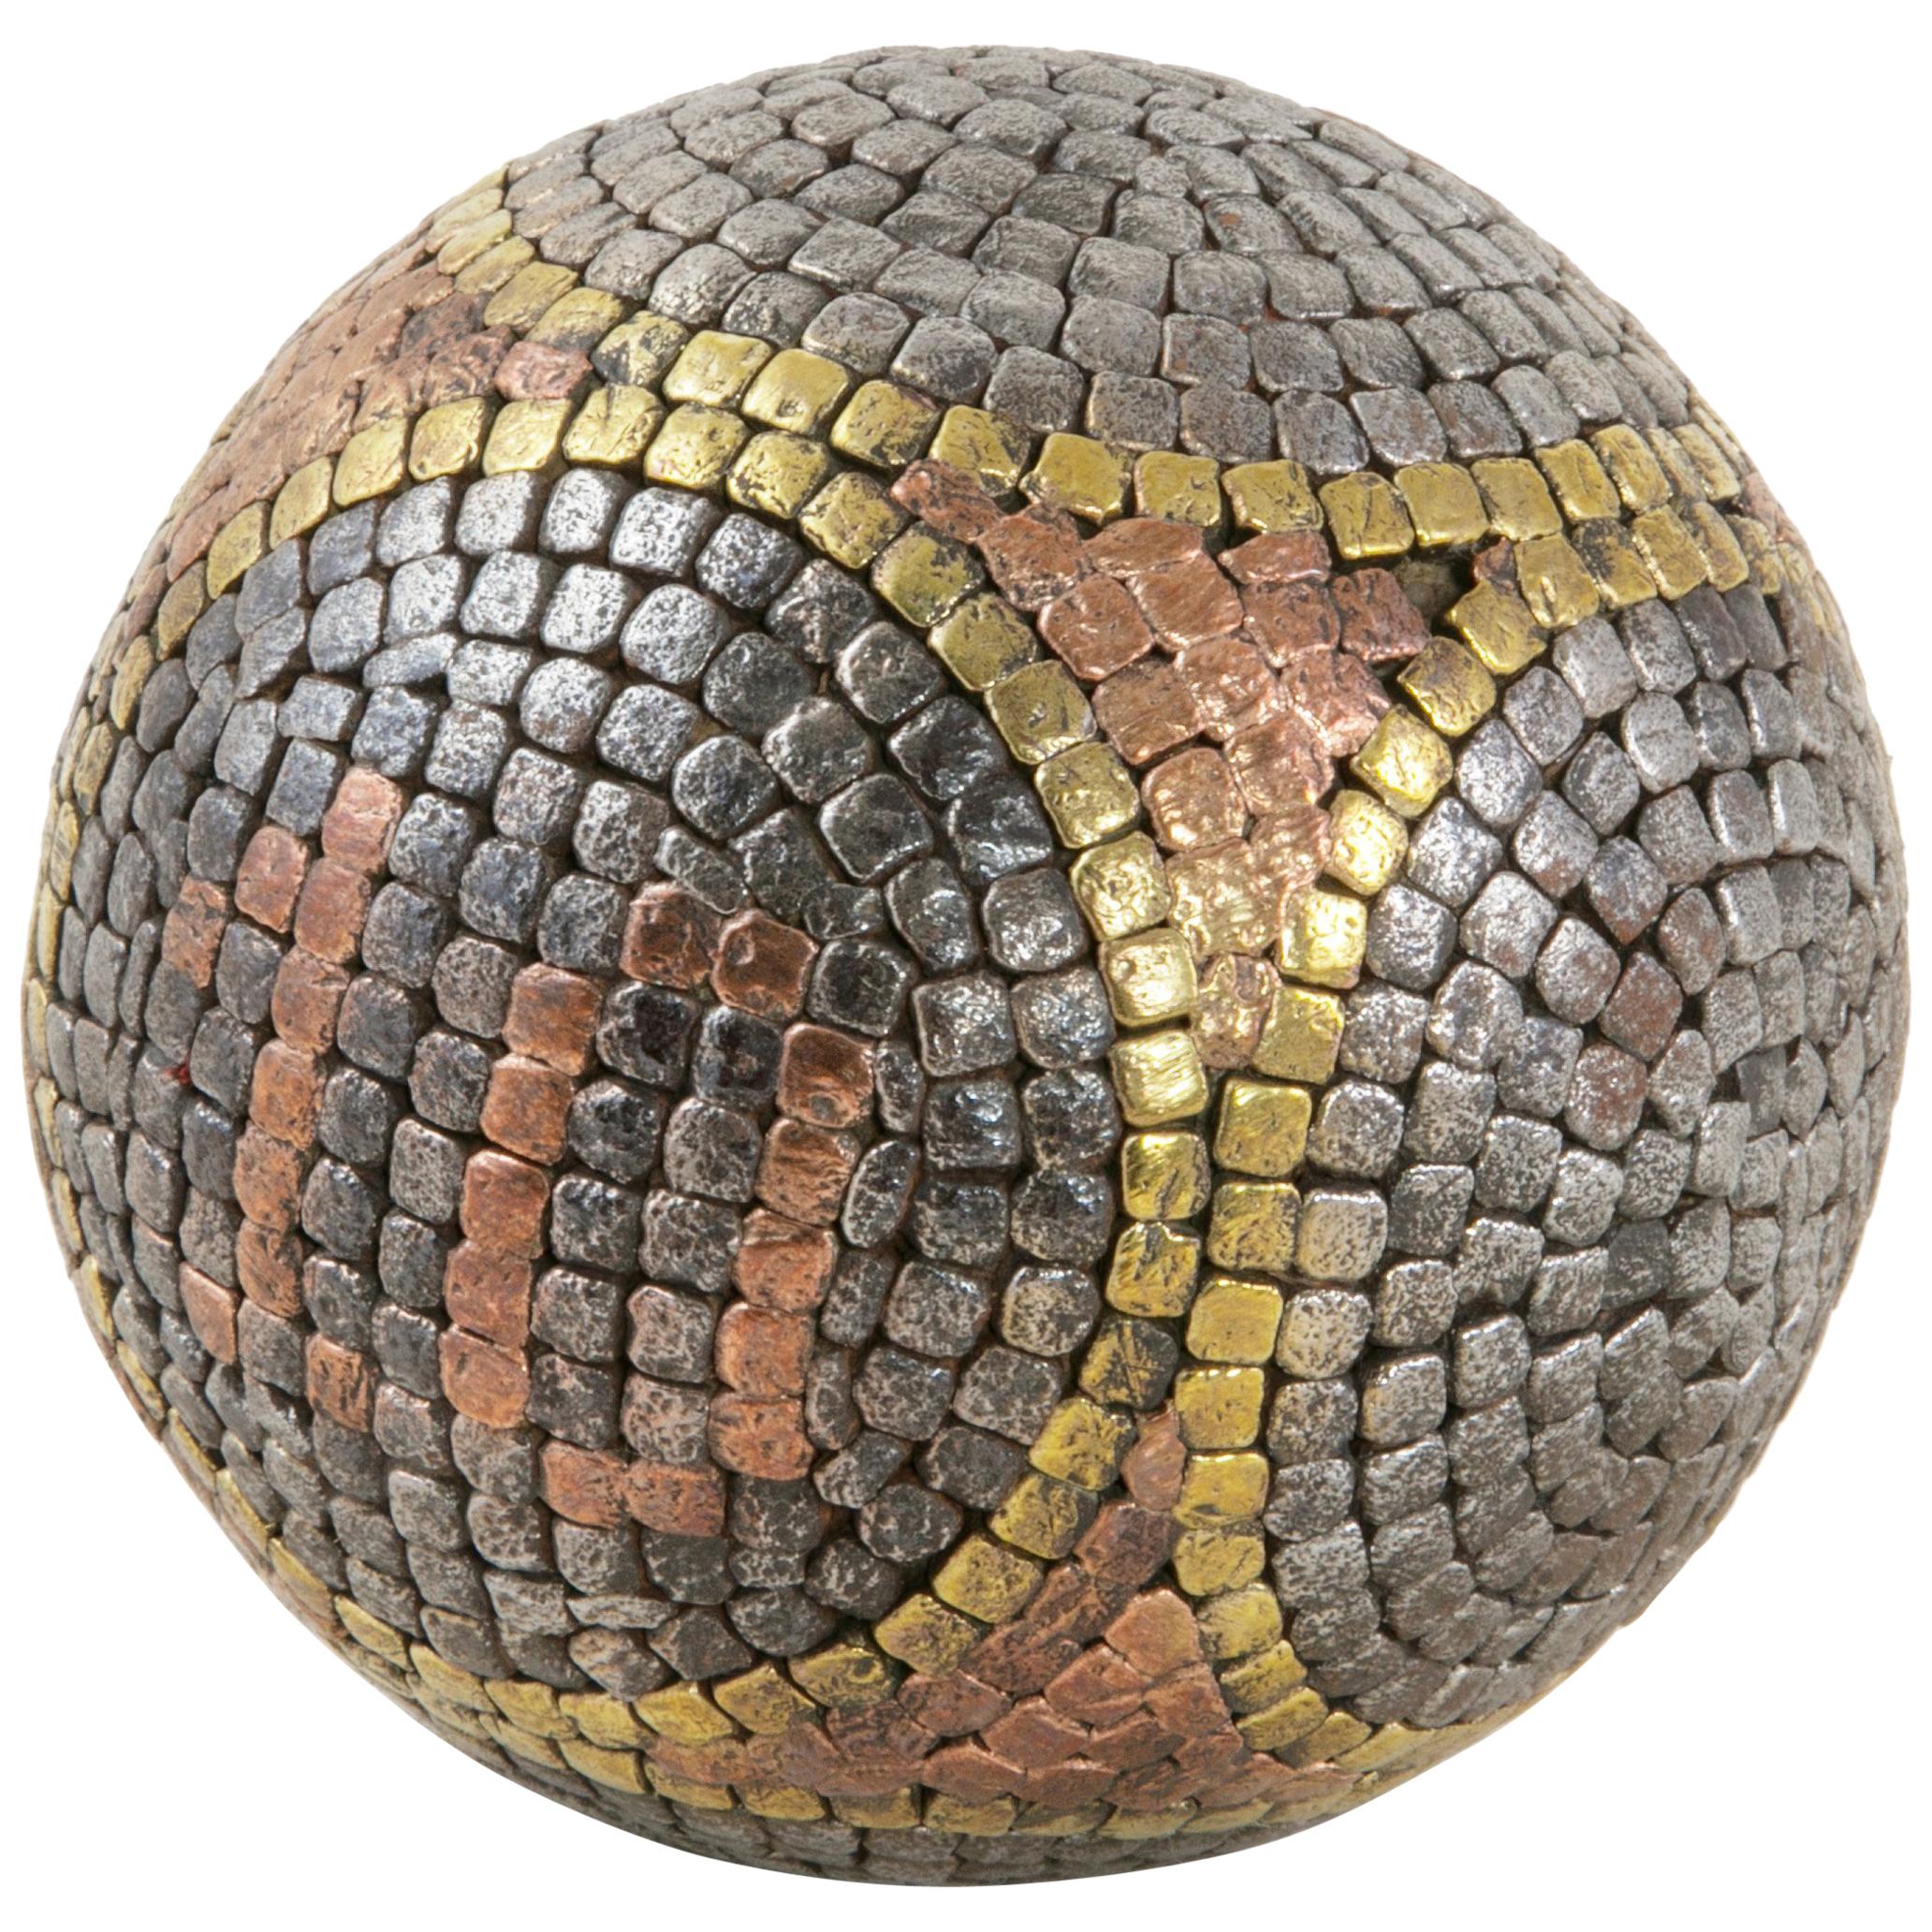 Early 20th Century French Petanque Lawn Ball with Steel, Copper, and Brass Nails